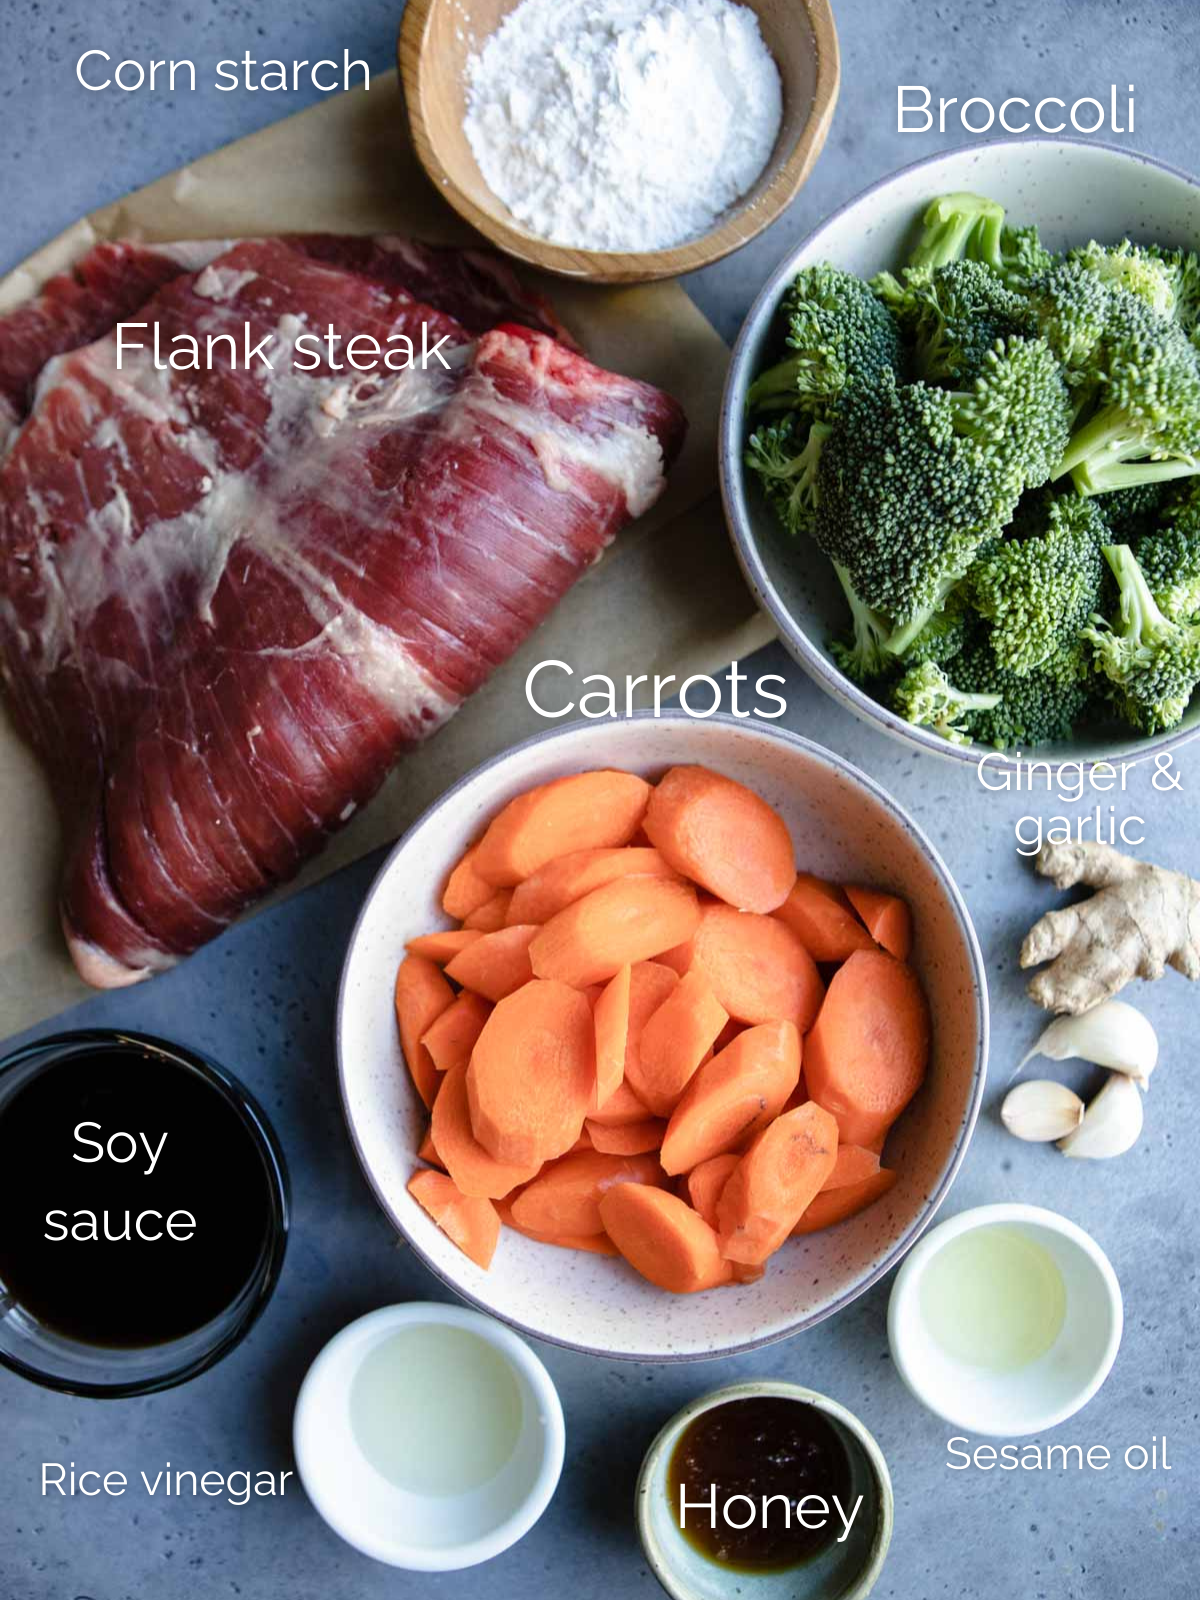 raw flank steak, carrots and broccoli, as well as various sauces to make beef teriyaki bowls